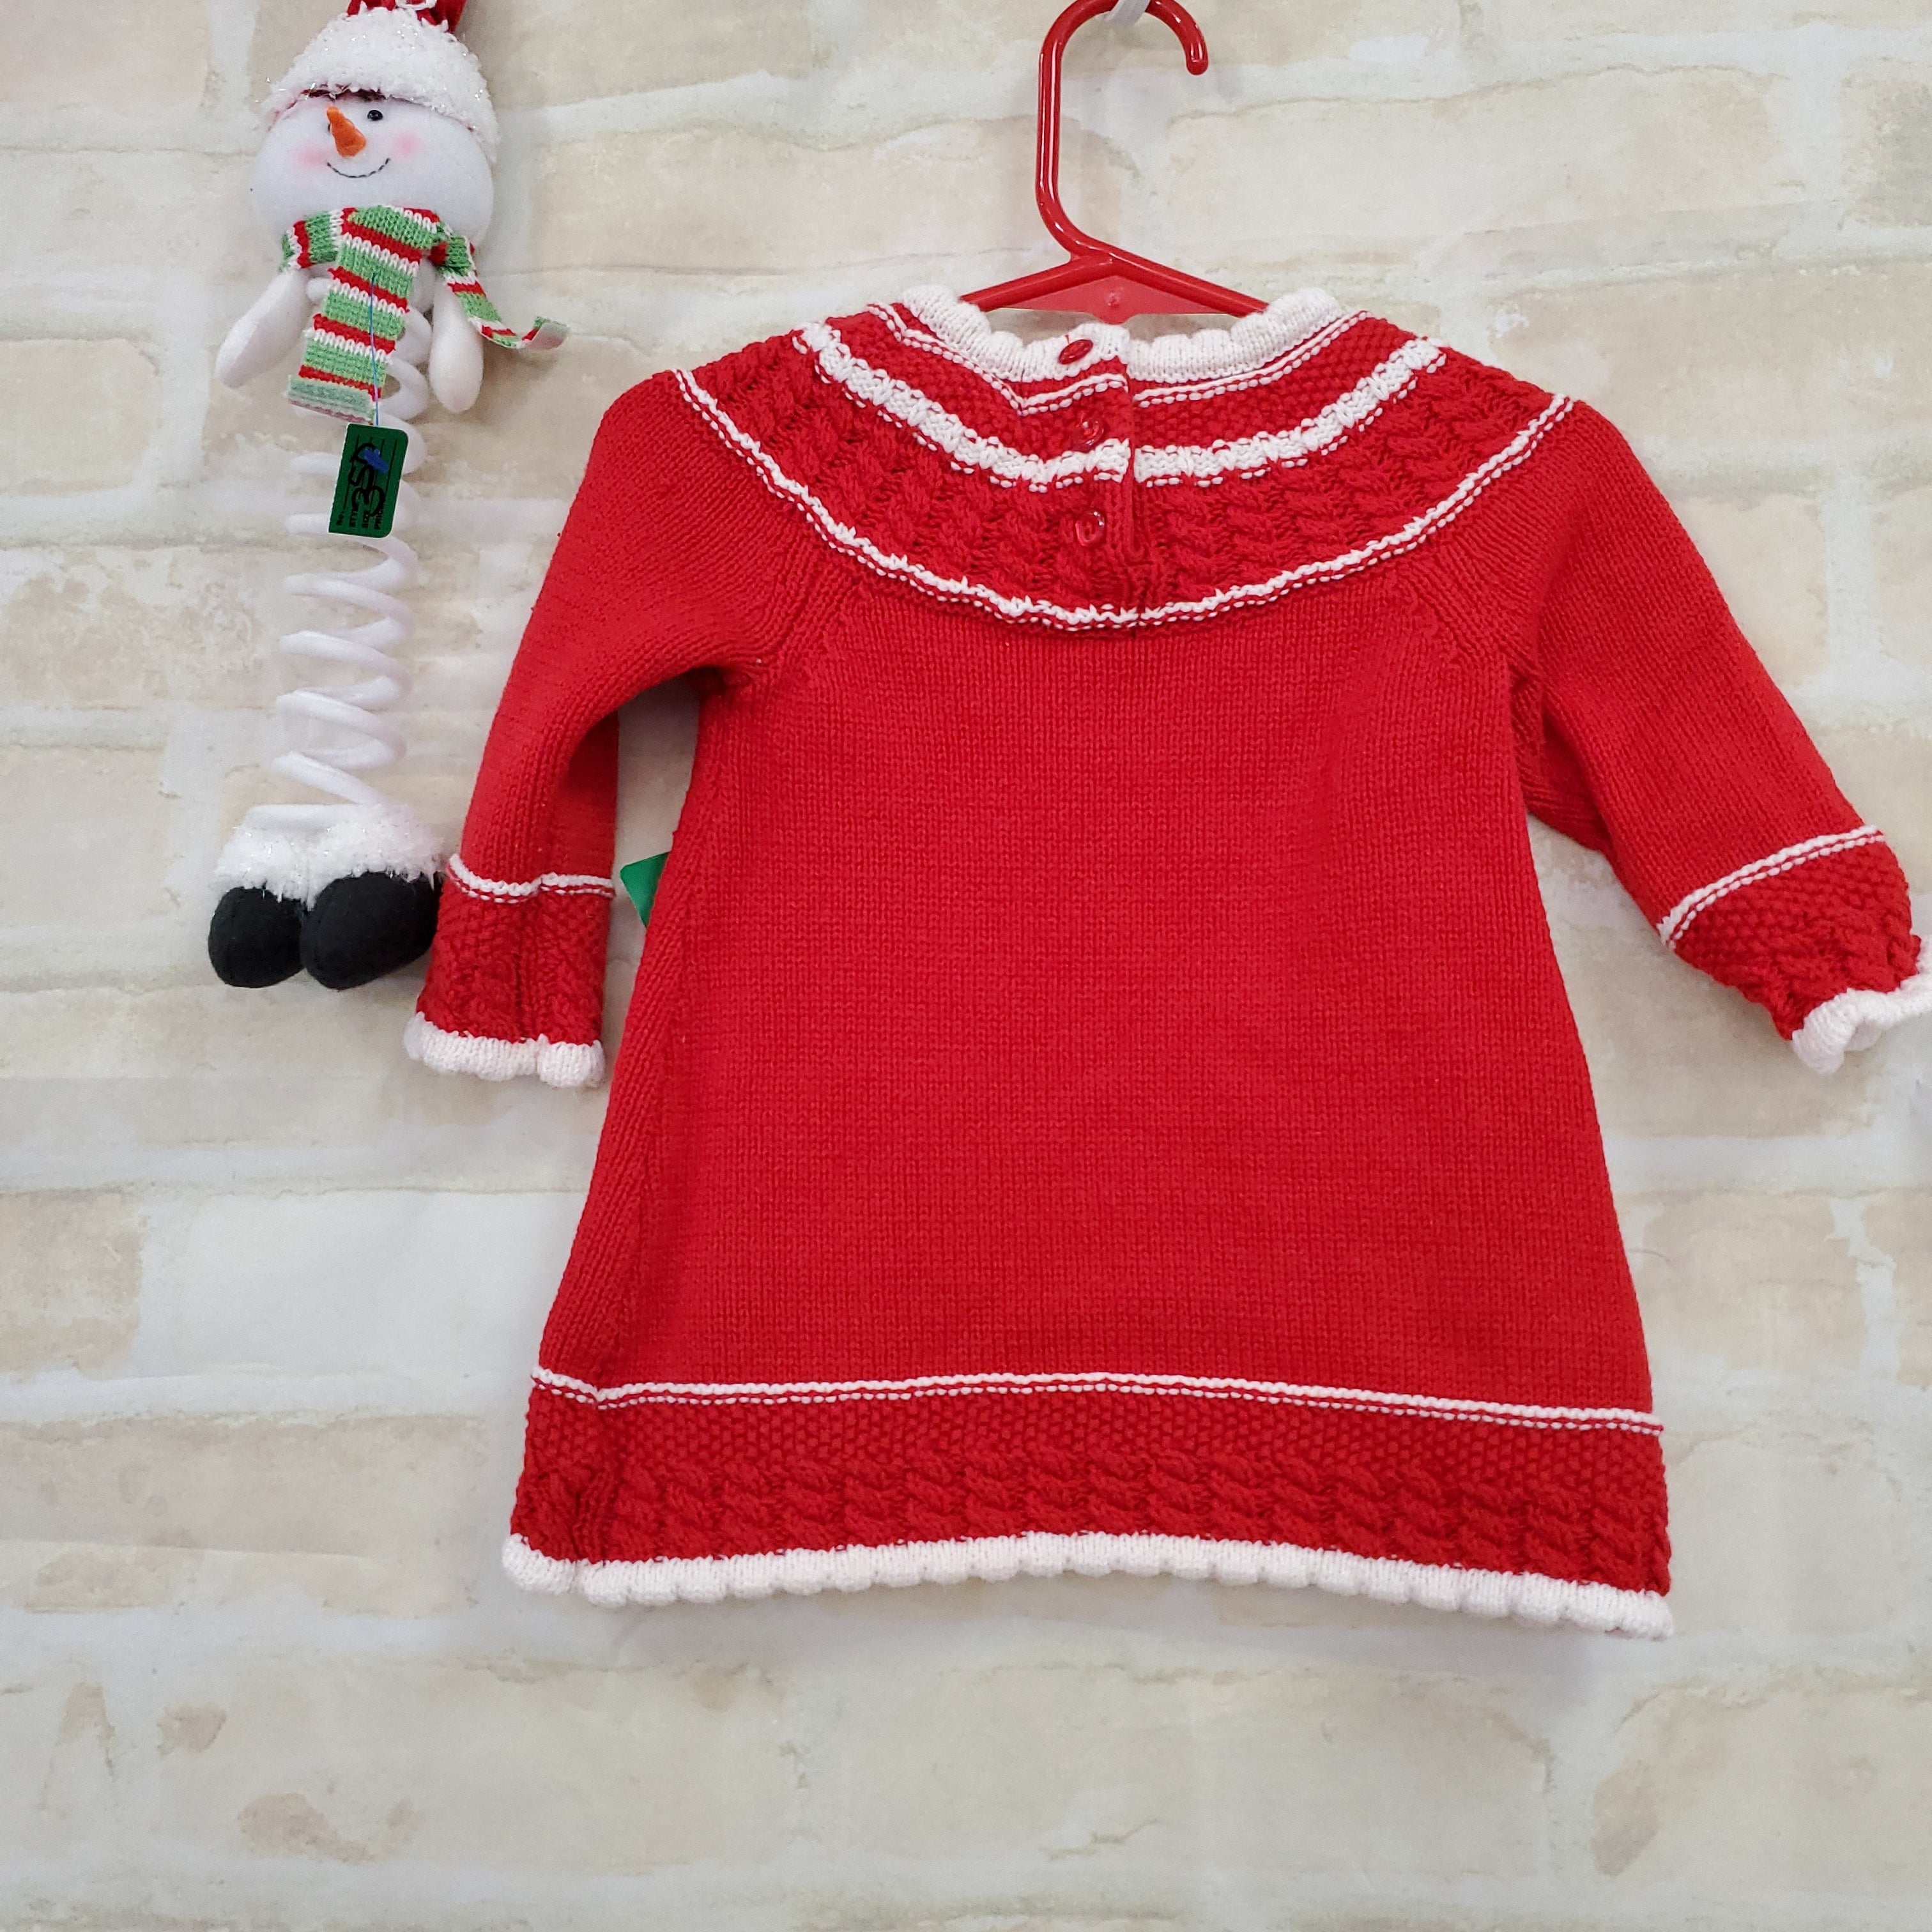 Heirloom girls dress red knit buttons L/S 3-6m